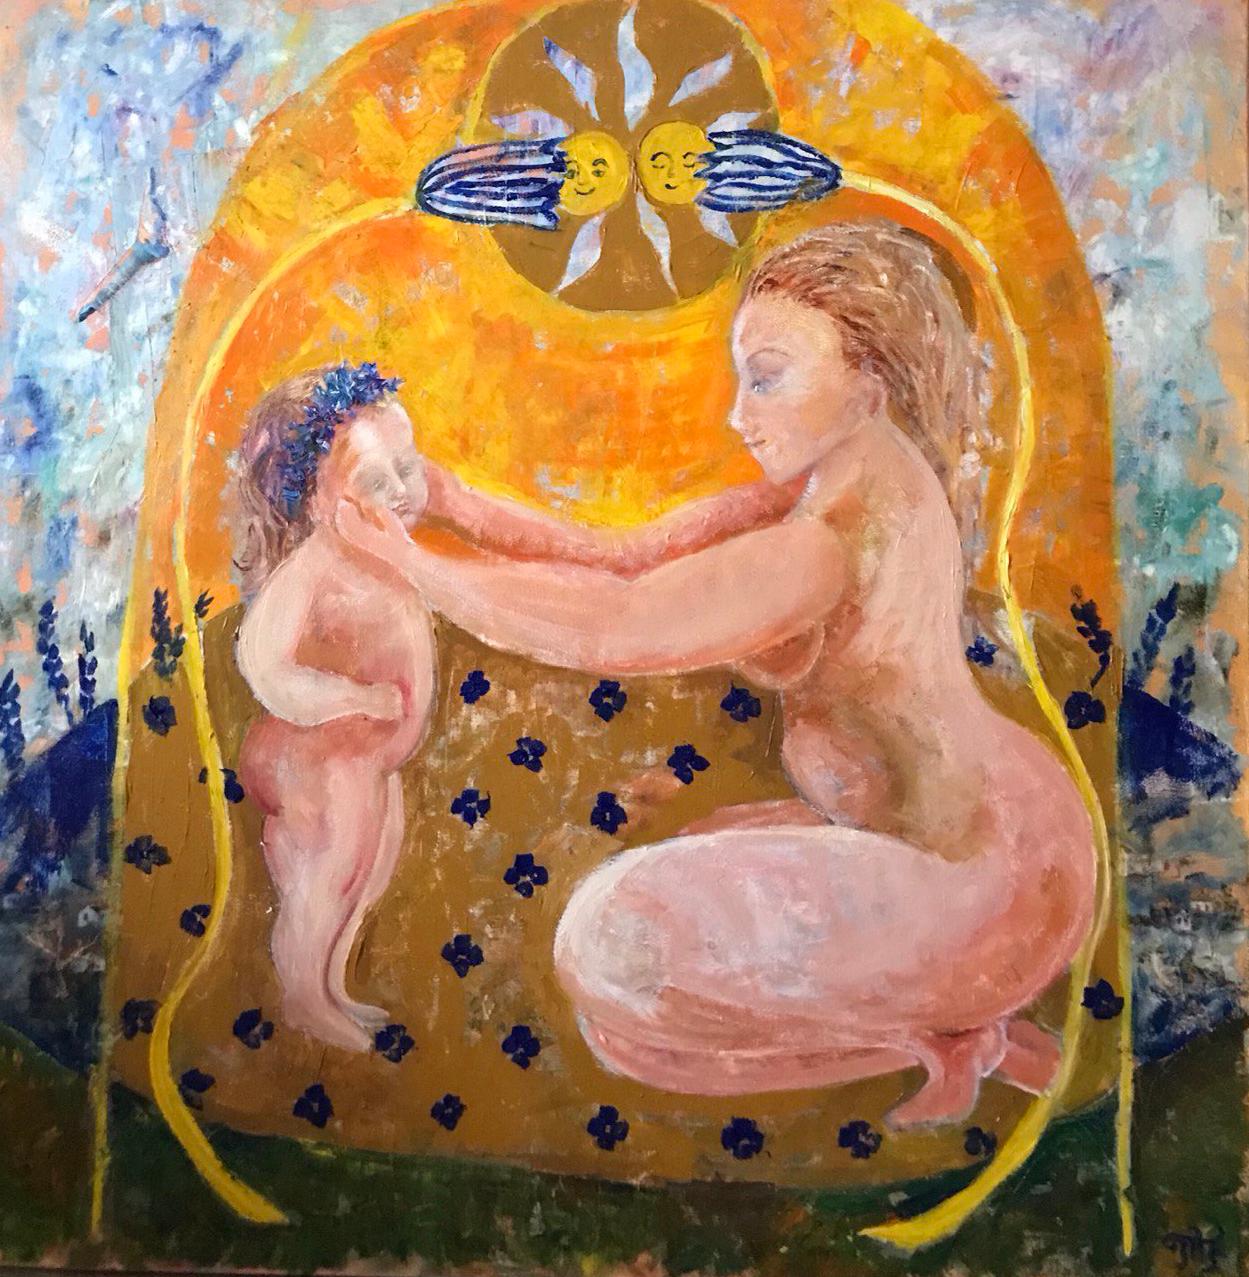 You Are My Universe, original oil painting by Tetiana Pchelnykova